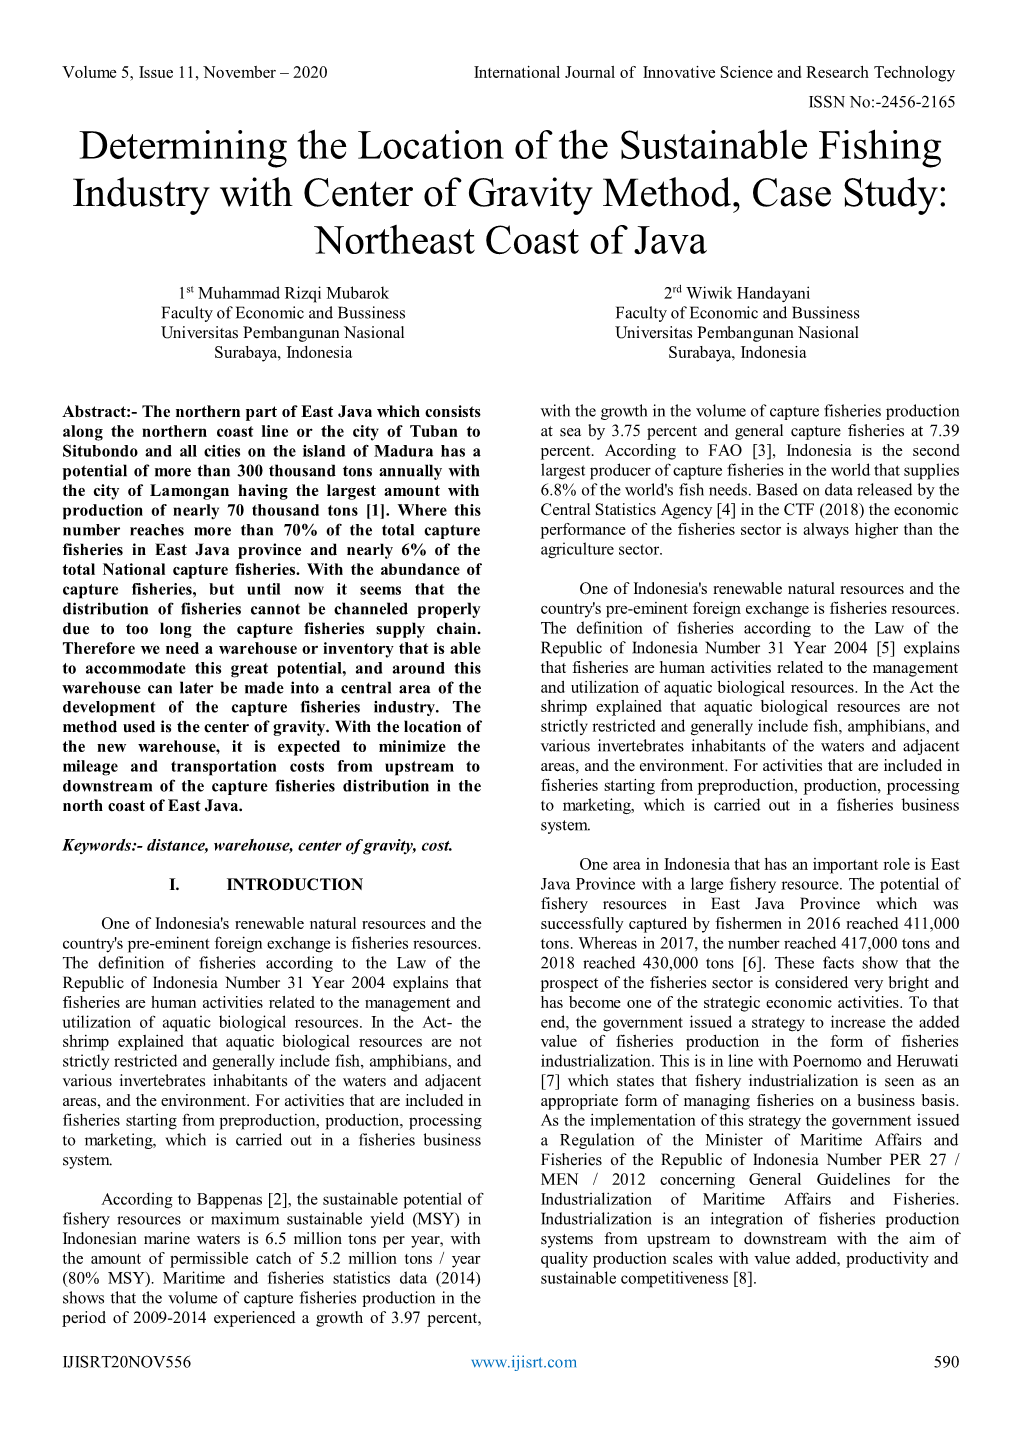 Determining the Location of the Sustainable Fishing Industry with Center of Gravity Method, Case Study: Northeast Coast of Java